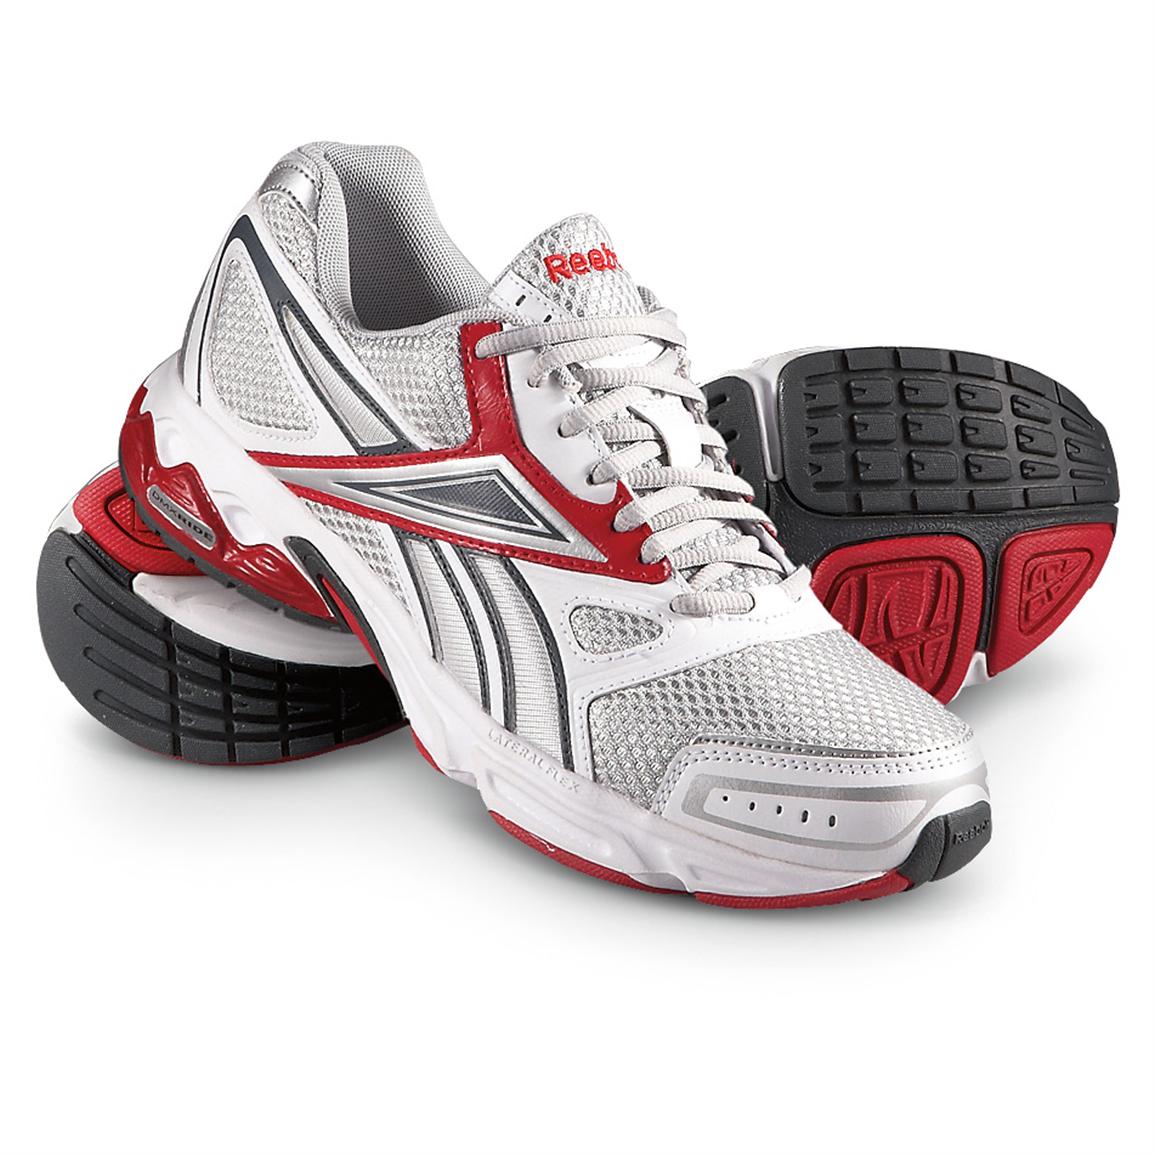 Mens Reebok® Instant Cross Trainers Silver White Red 235665